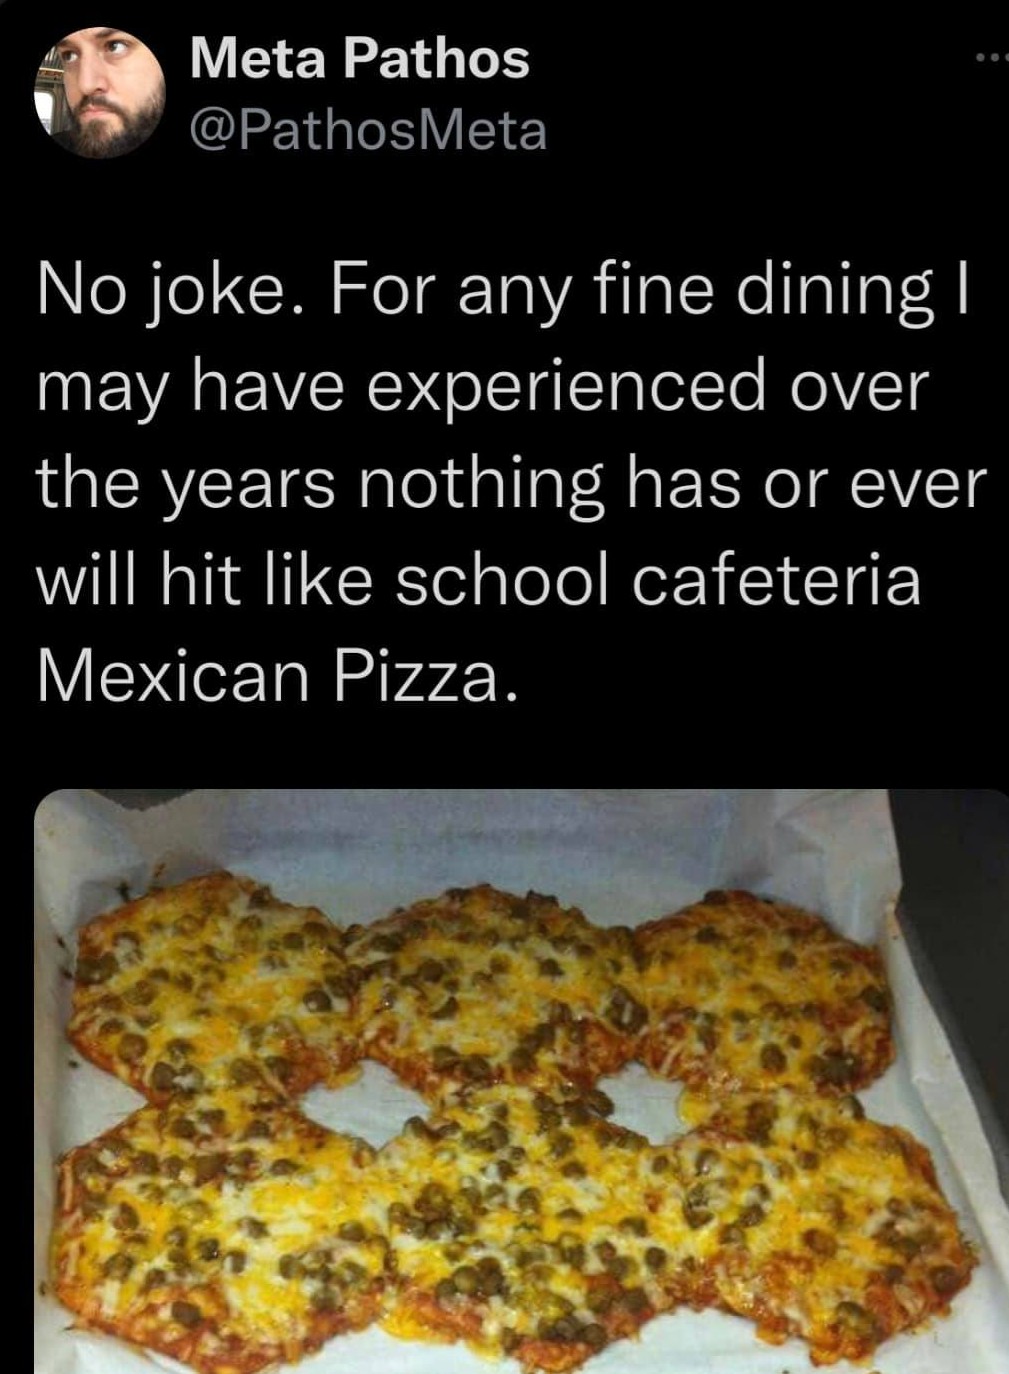 funny tweets - school lunch fiestada pizza - Meta Pathos Meta No joke. For any fine dining I may have experienced over the years nothing has or ever will hit school cafeteria Mexican Pizza.